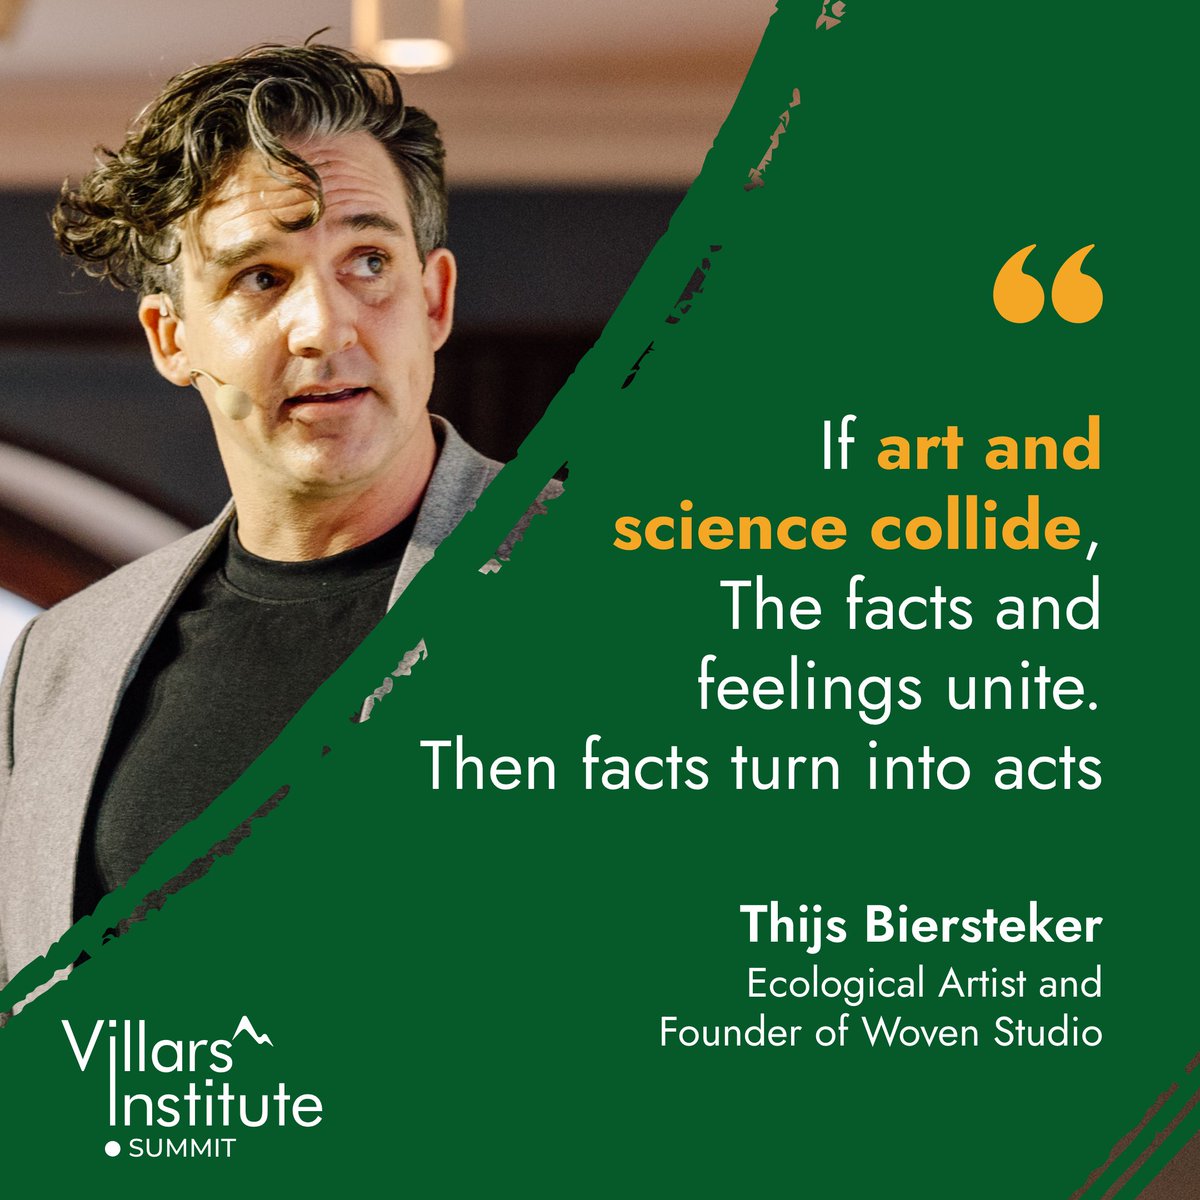 The arts have immense power to help science communicate facts in an accessible way. 

Awareness artist @T_Biersteker collaborates with top scientists to turn #climatedata into immersive art installations, evoking emotions to inspire change ✨ 

#ImmersiveArt #ArtMeetsScience